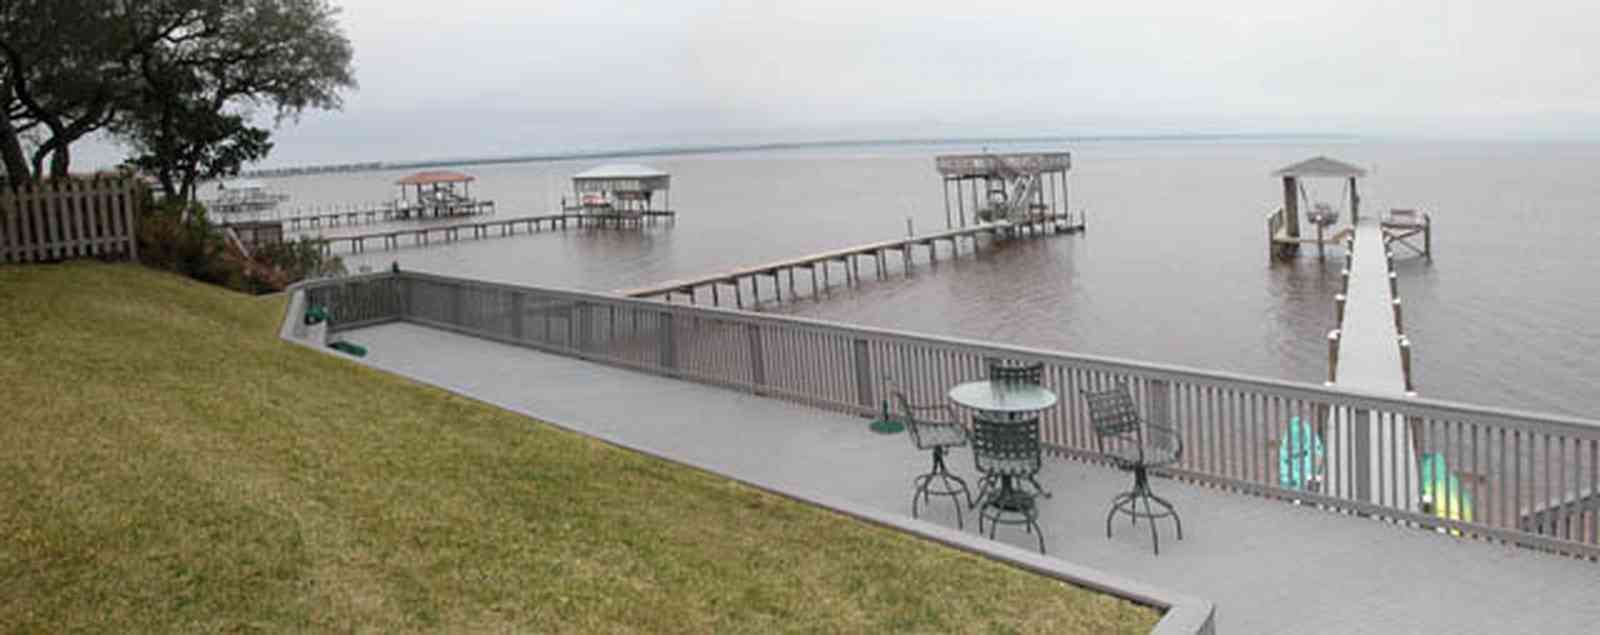 Gulf-Breeze:-228-North-Cliff-Dr_08.jpg:  swimming pool, bay, dock, pier, deck, flag pole, boat, bayfront